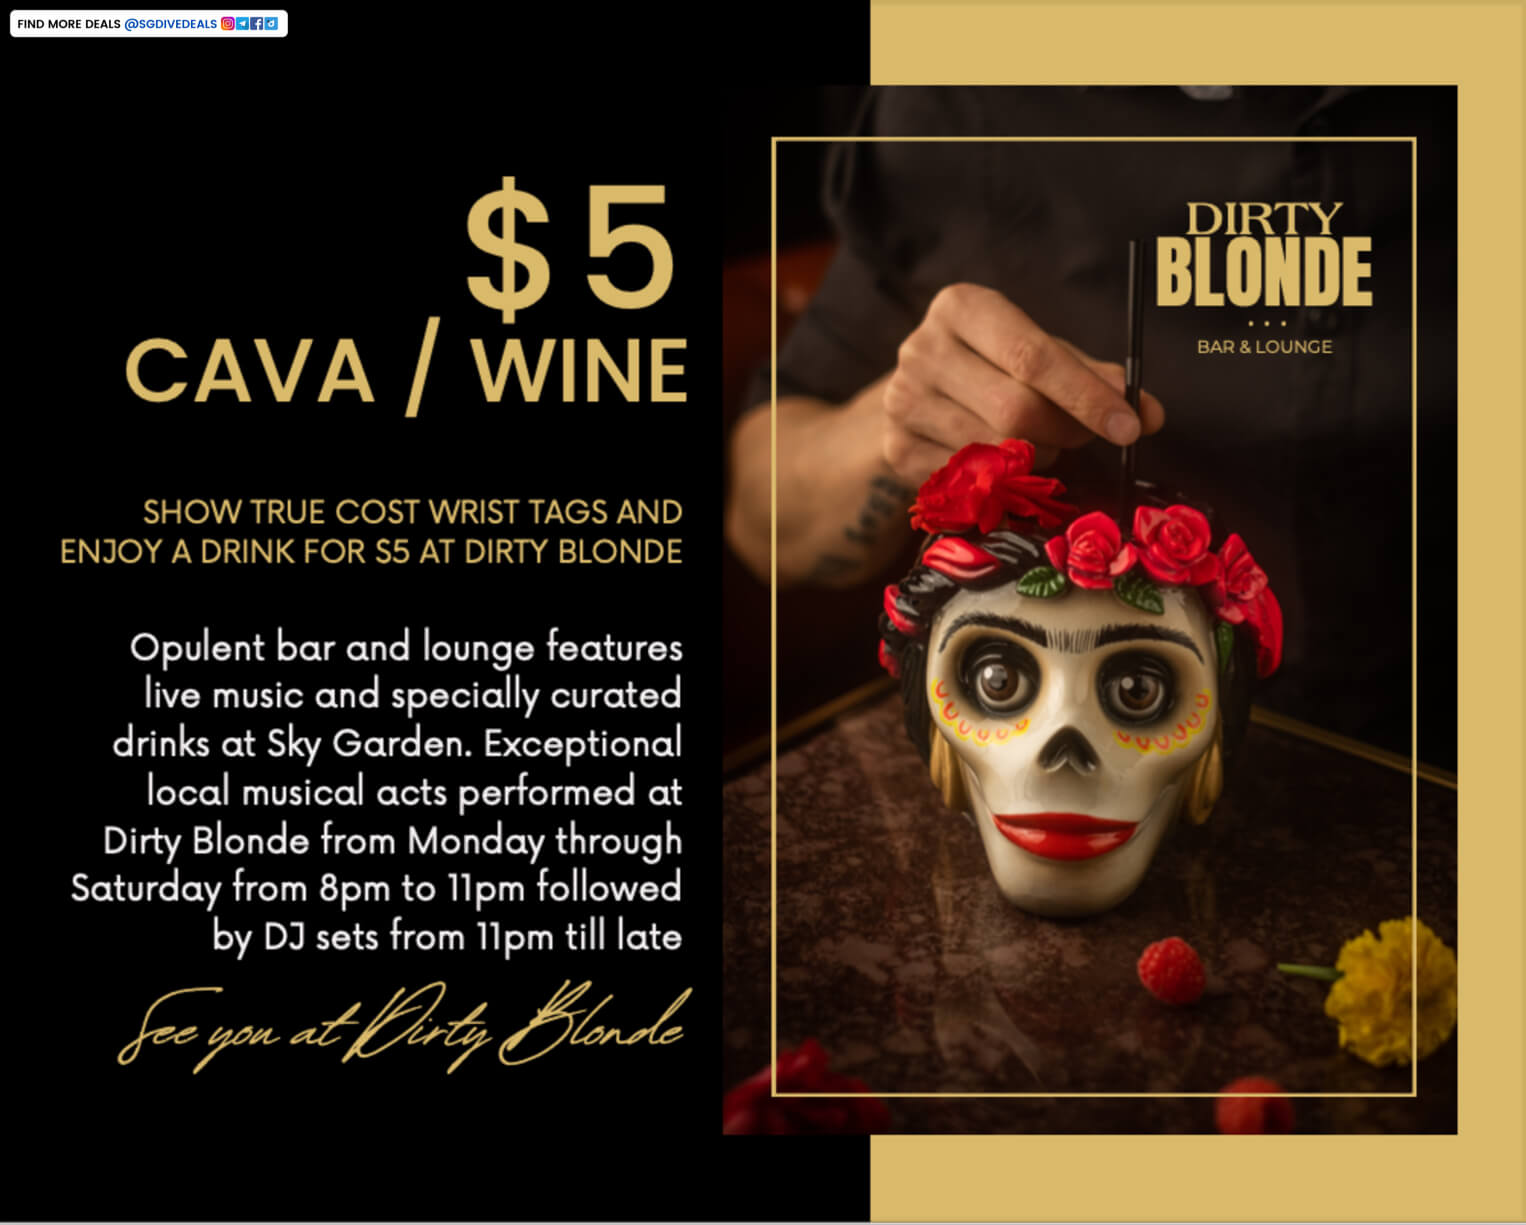 Dirty Blonde,Enjoy a glass of wine for only $5 at